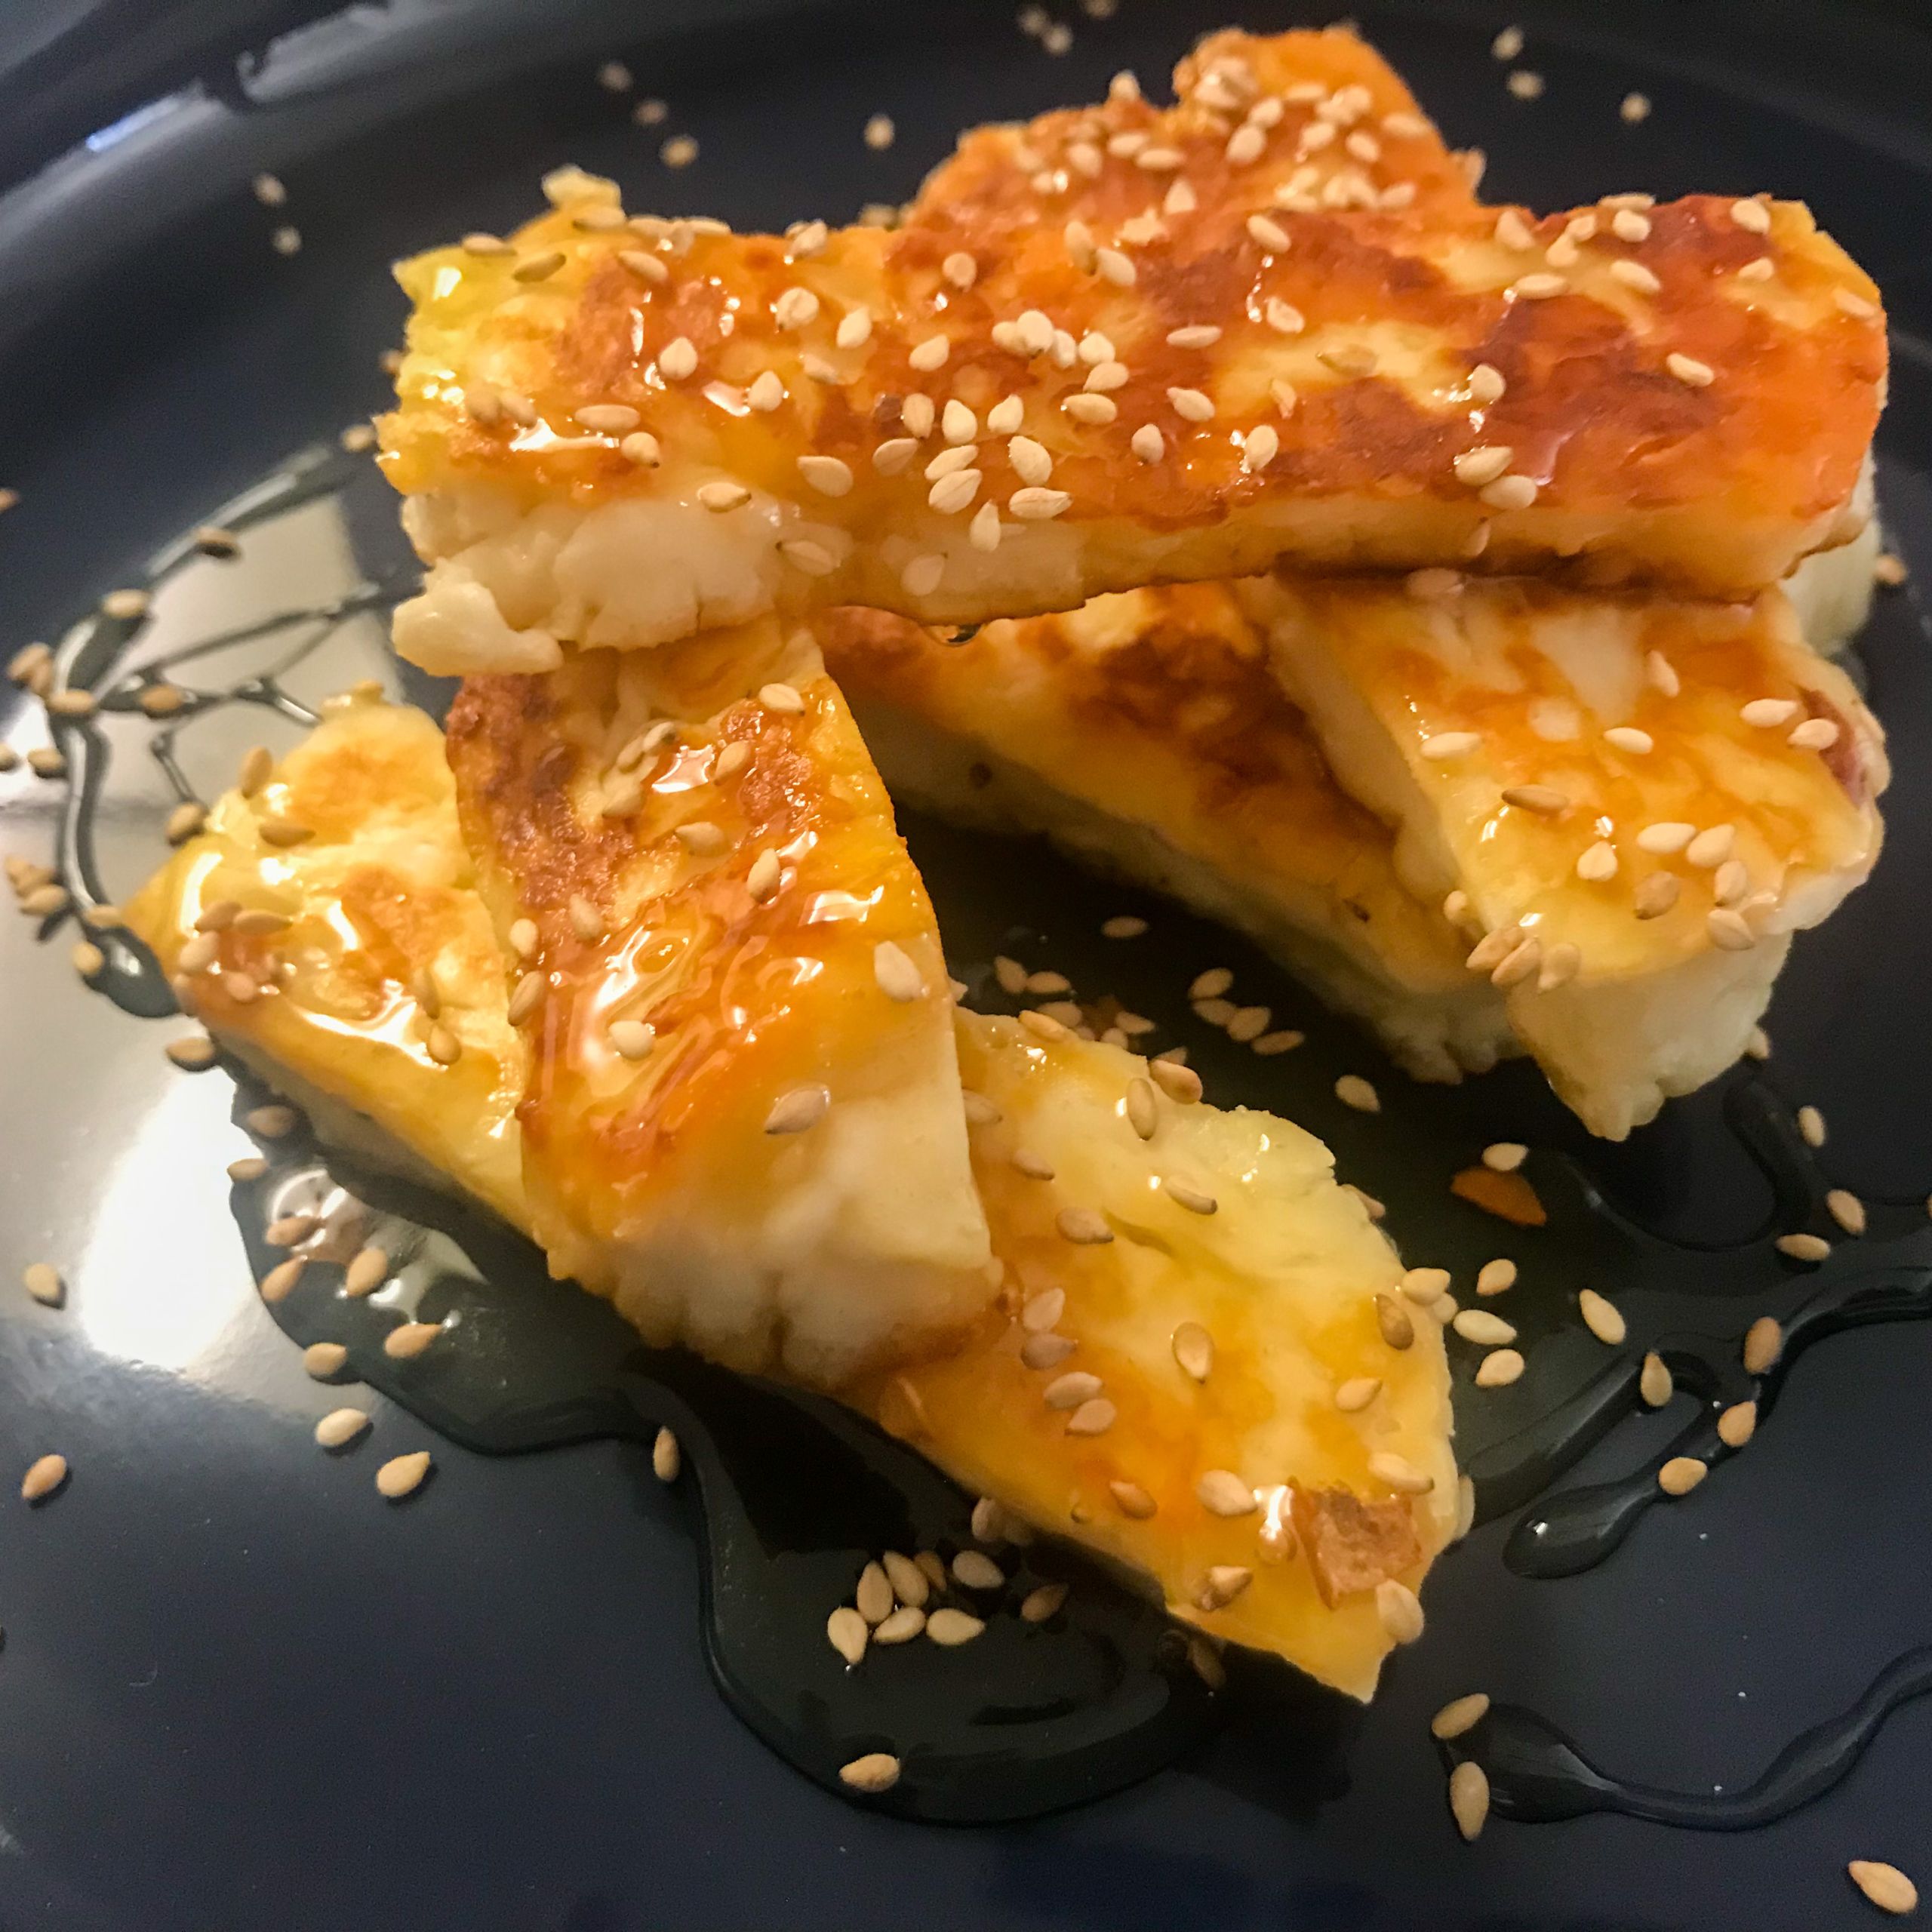 cooked halloumi fries on a platter with honey, chili flakes and sesame seeds